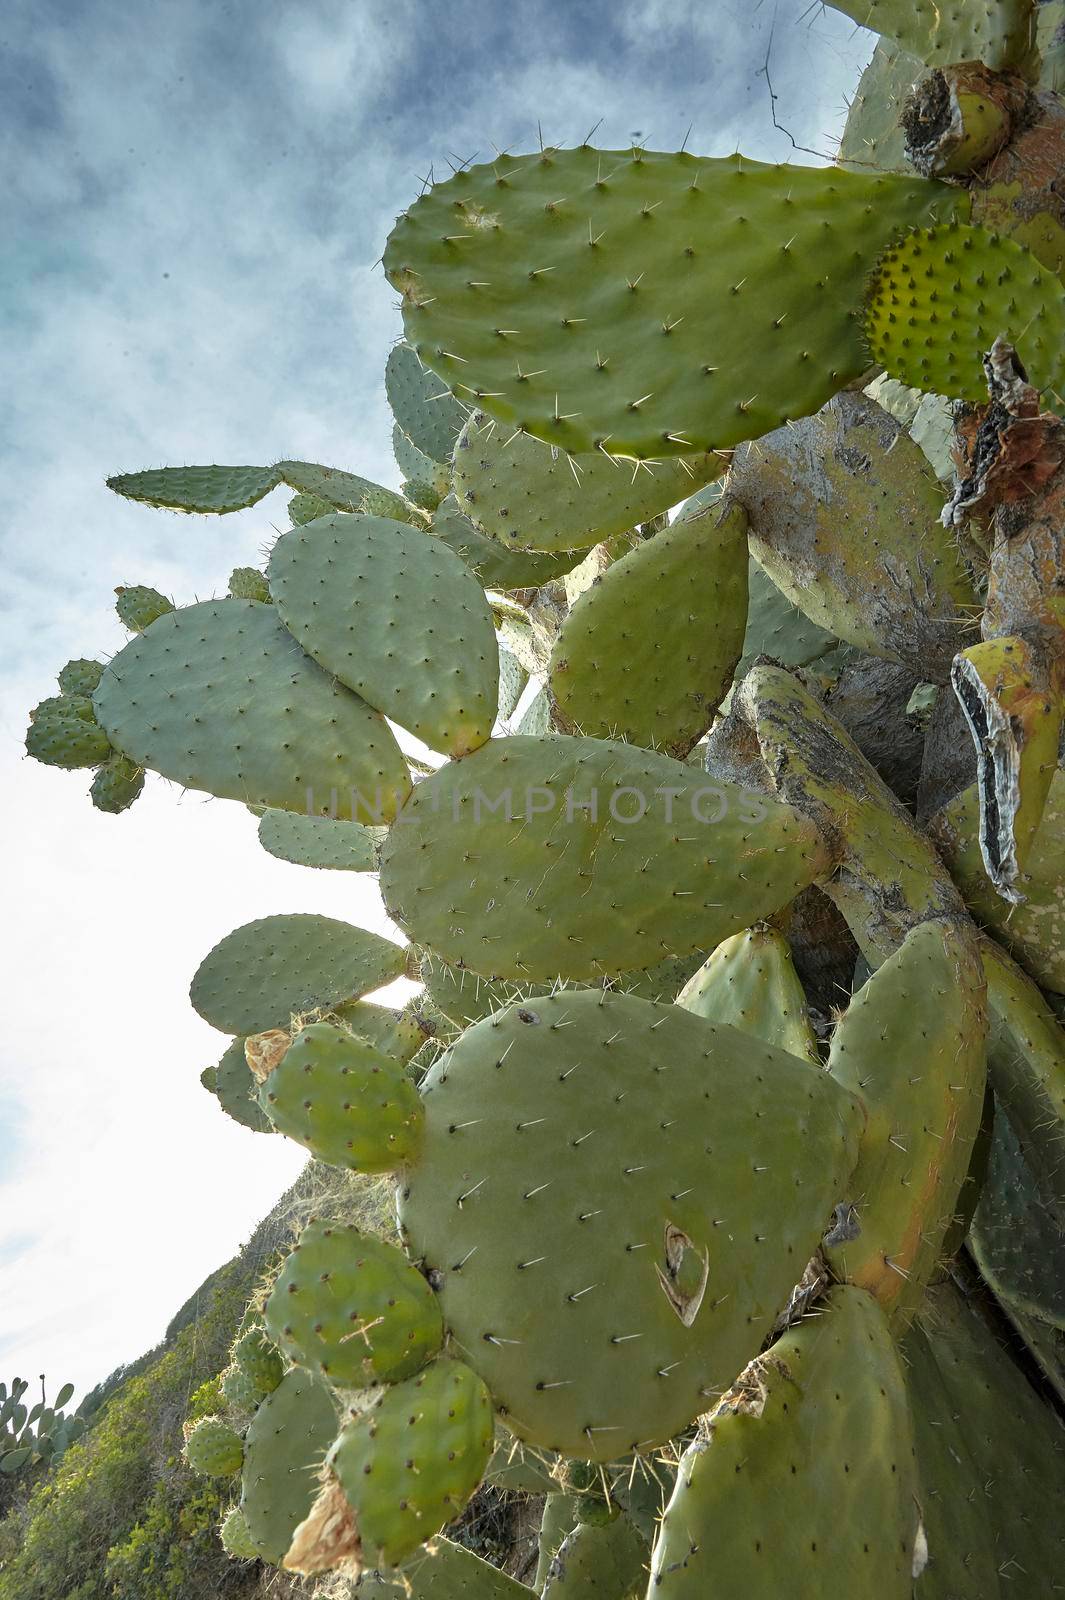 The growth of prickly pear by pippocarlot